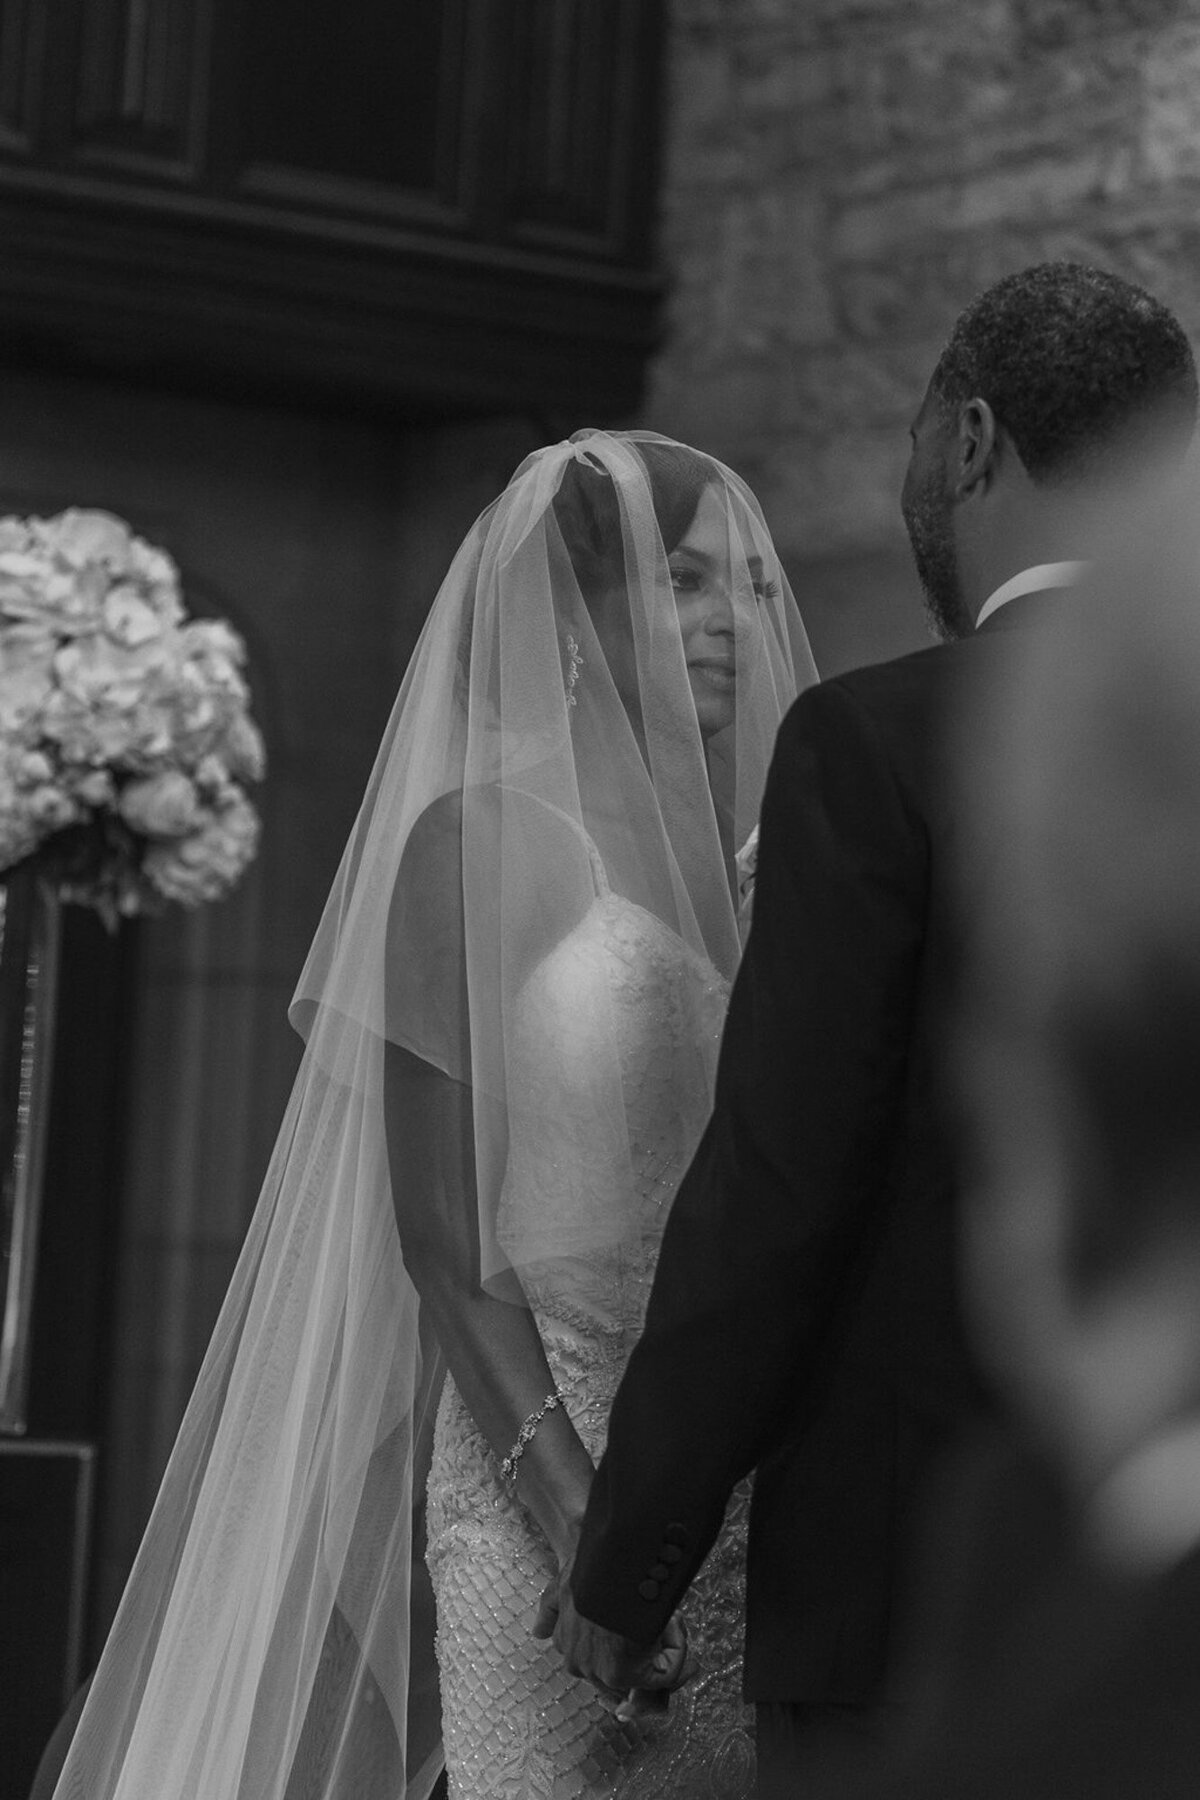 bride with cathedral veil at wedding